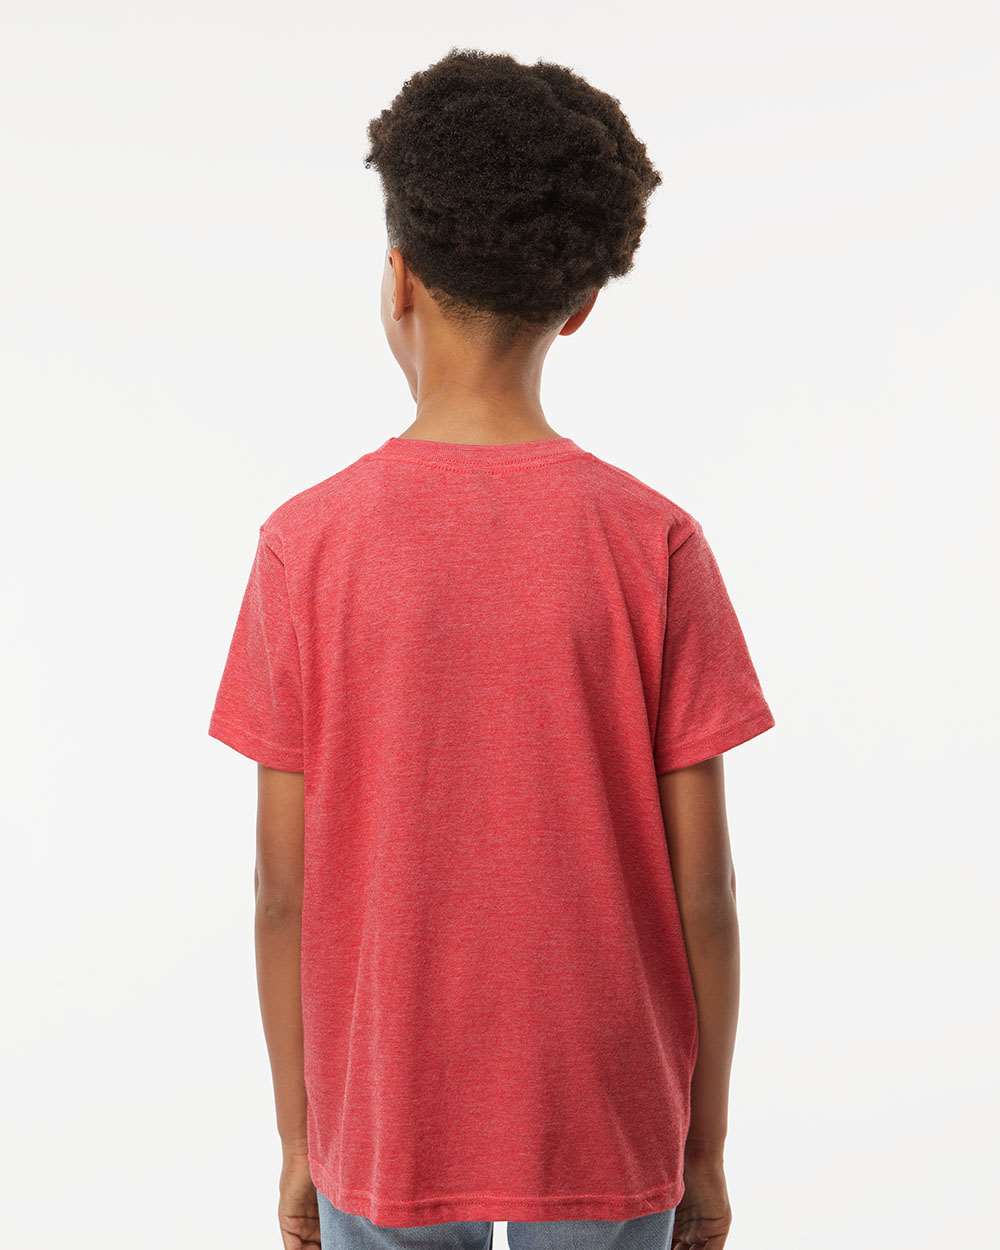 M&O Youth Deluxe Blend T-Shirt 3544 #colormdl_Heather Red